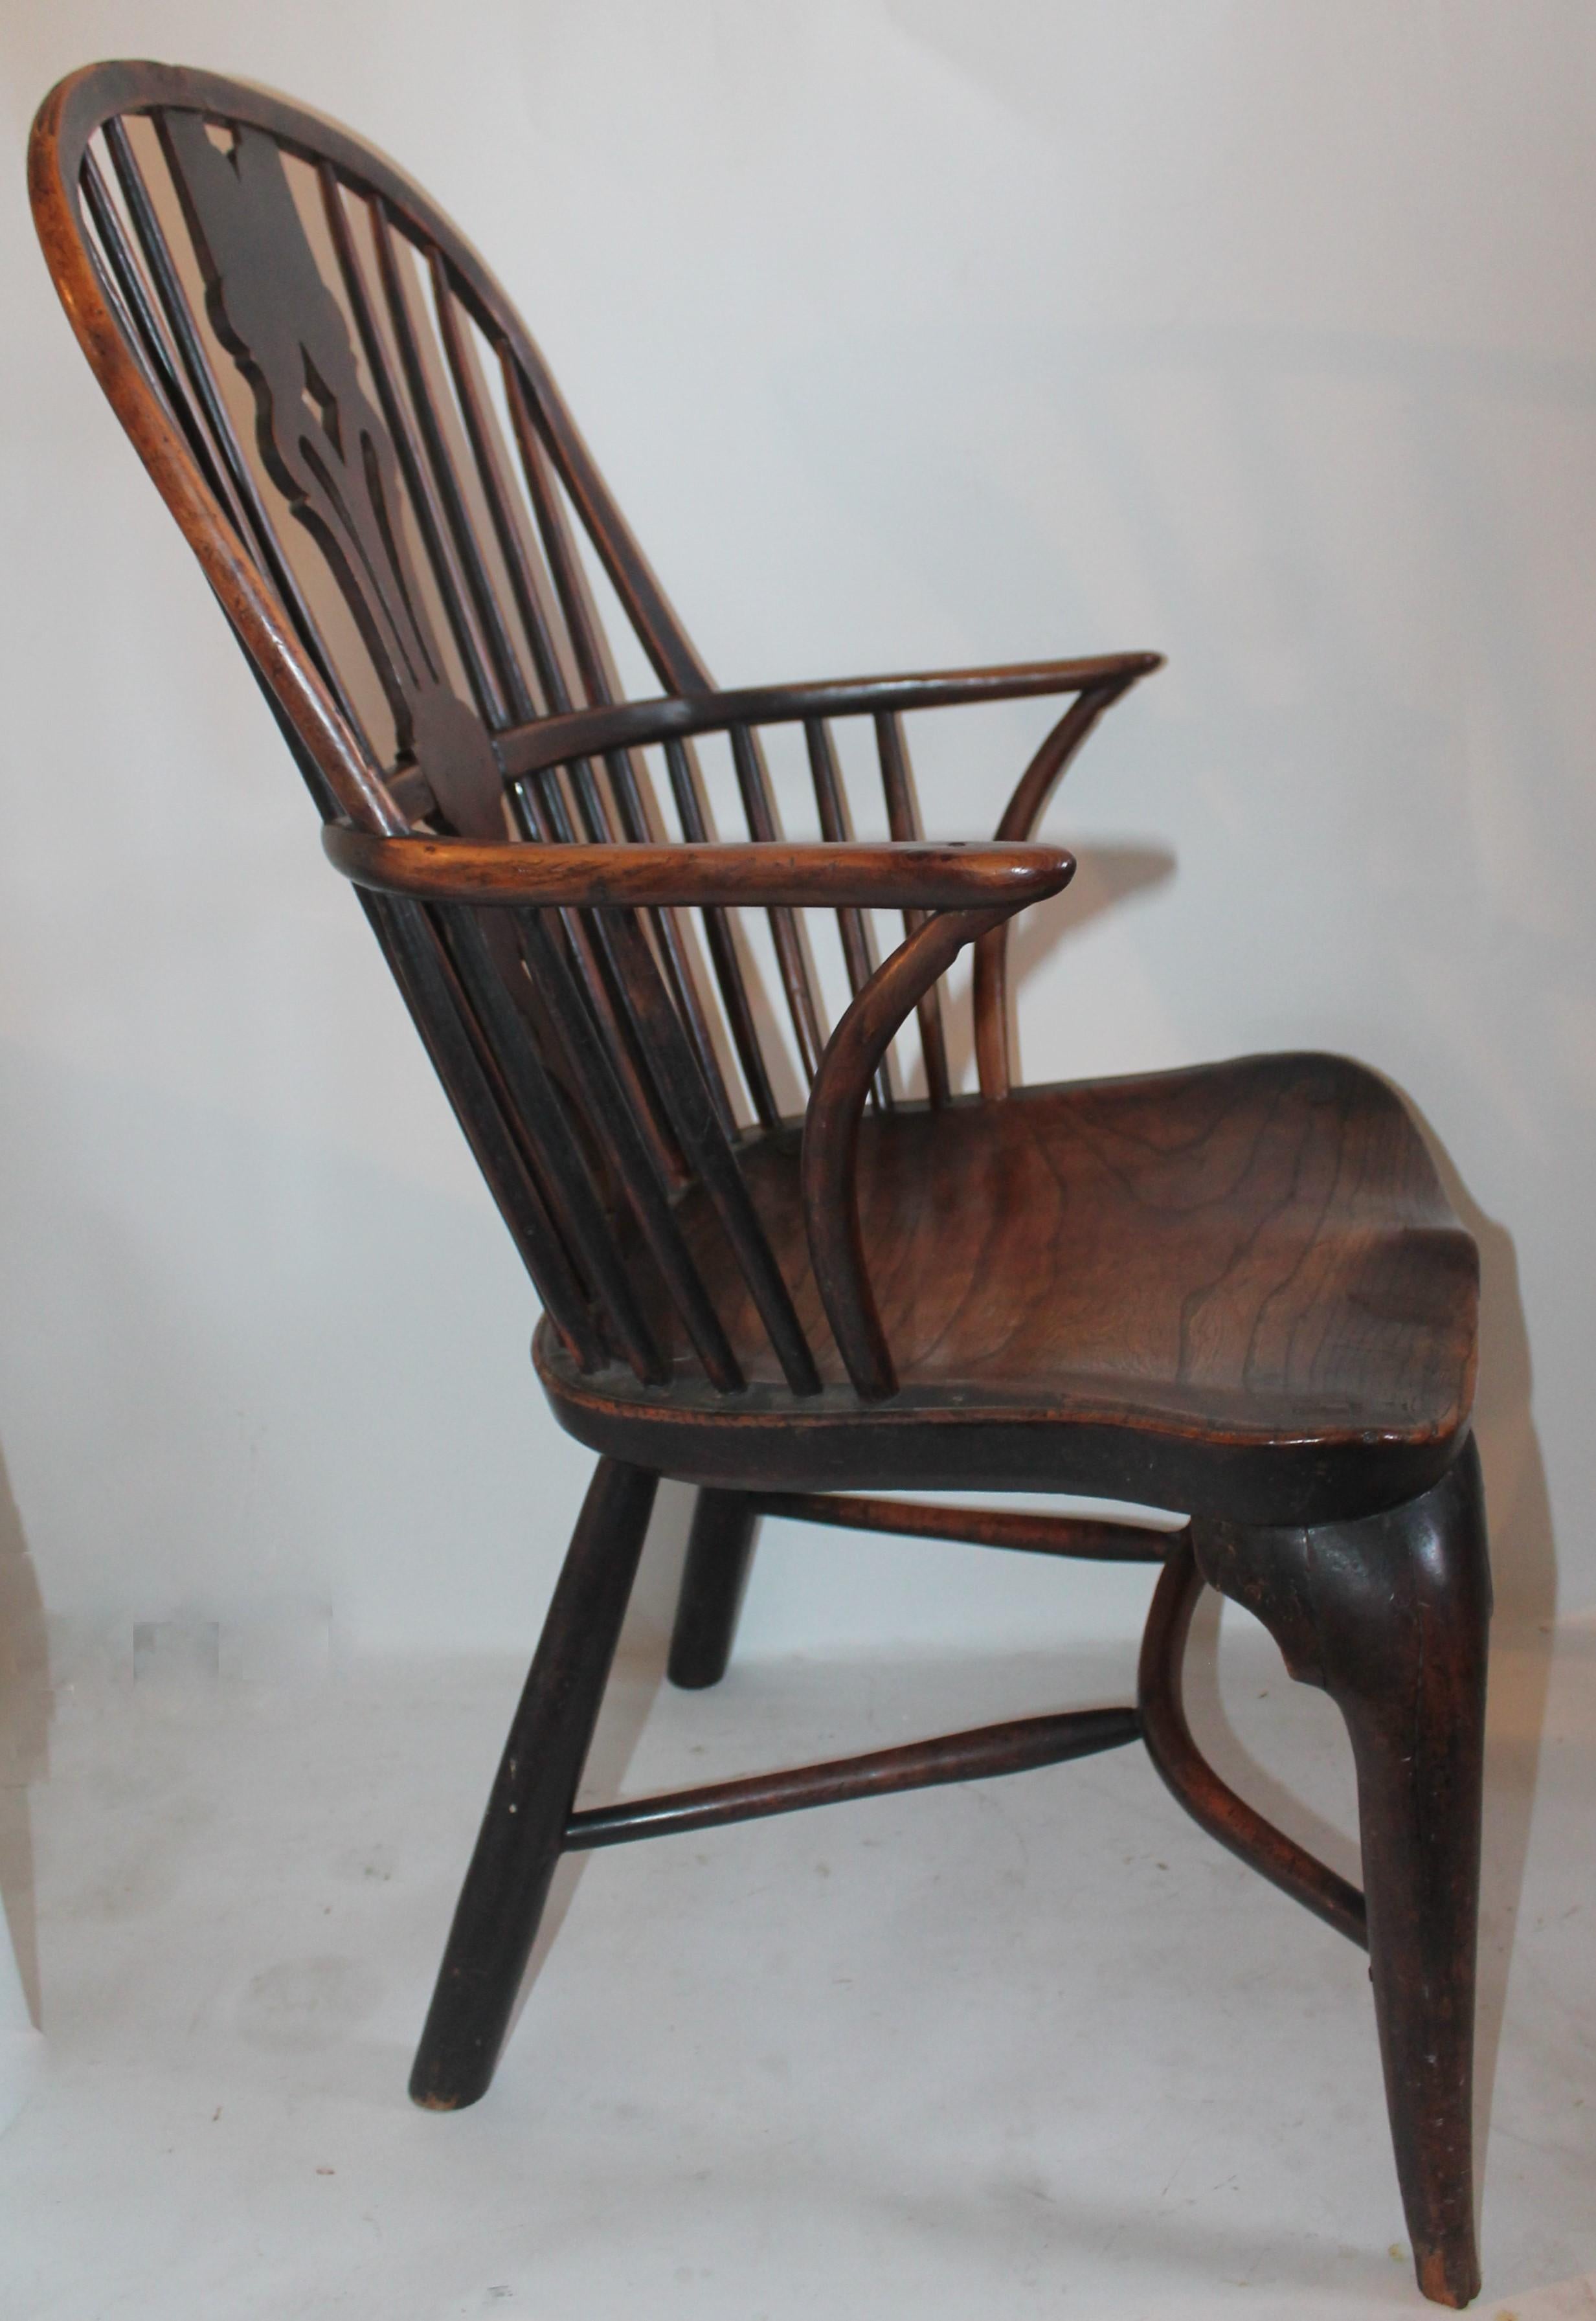 Hand-Crafted 18th Century English Windsor Side Chair For Sale